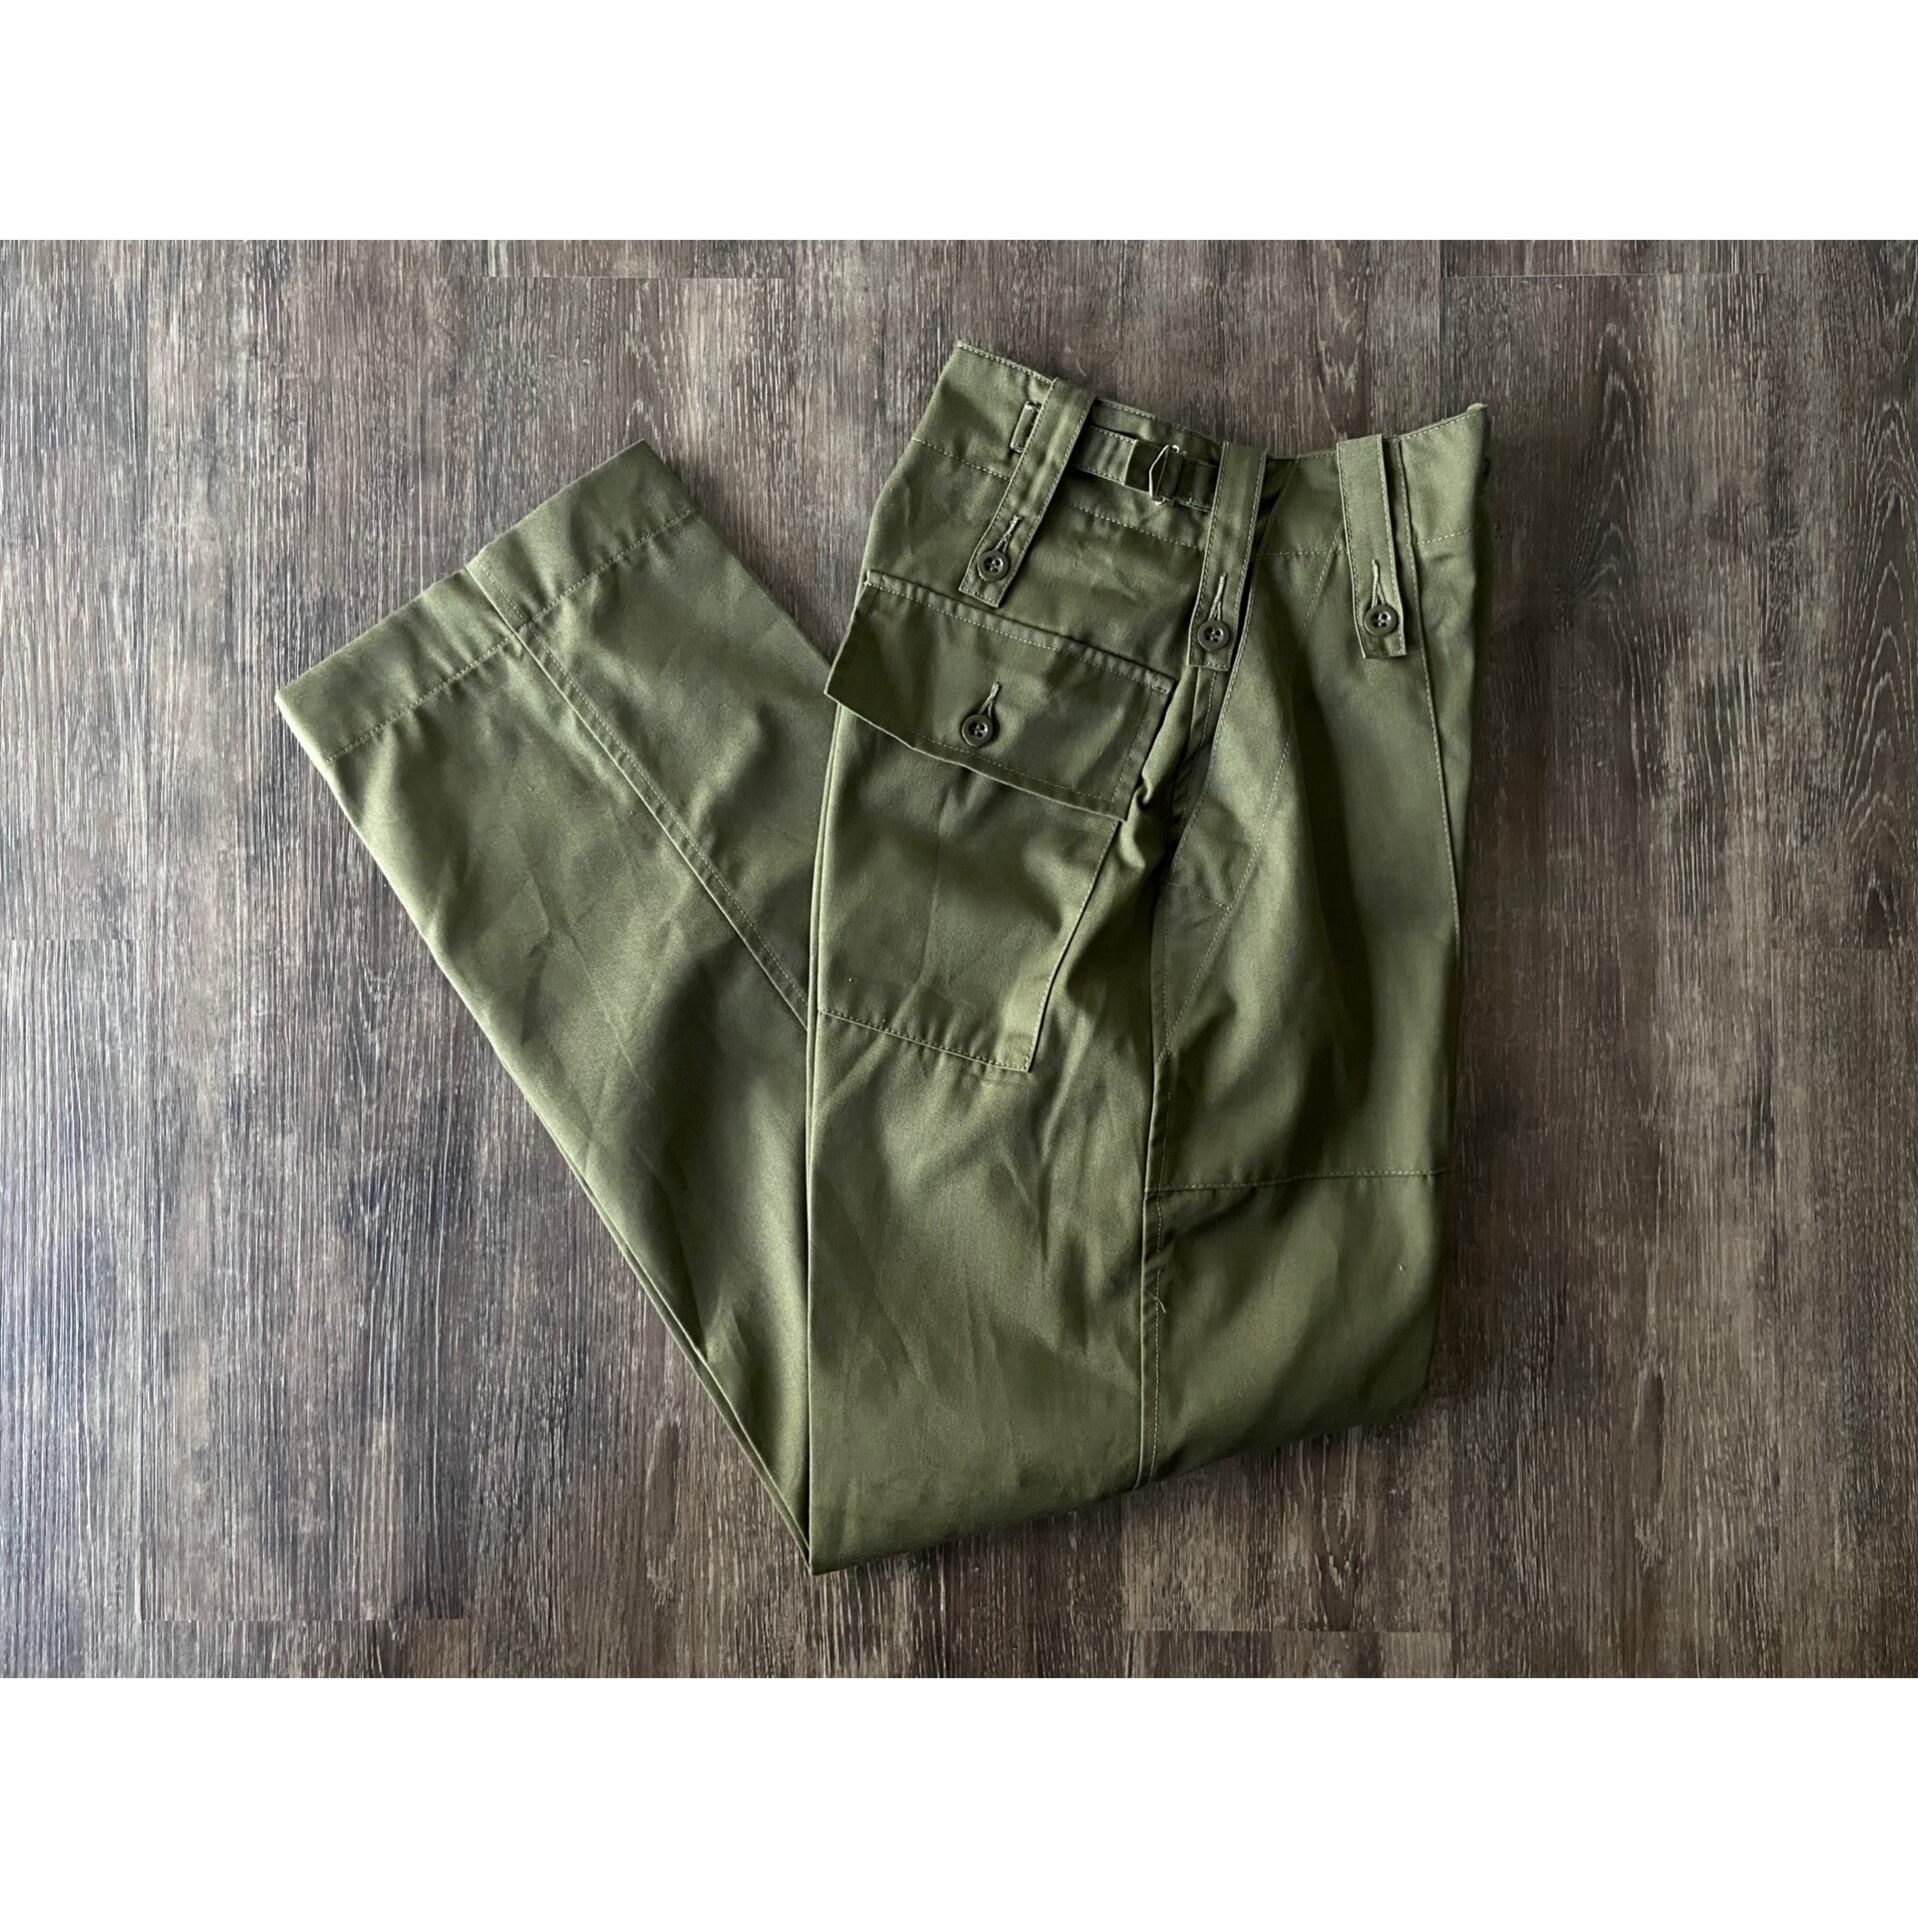 British Army” woman's lightweight fatigue pants deadstock② size60